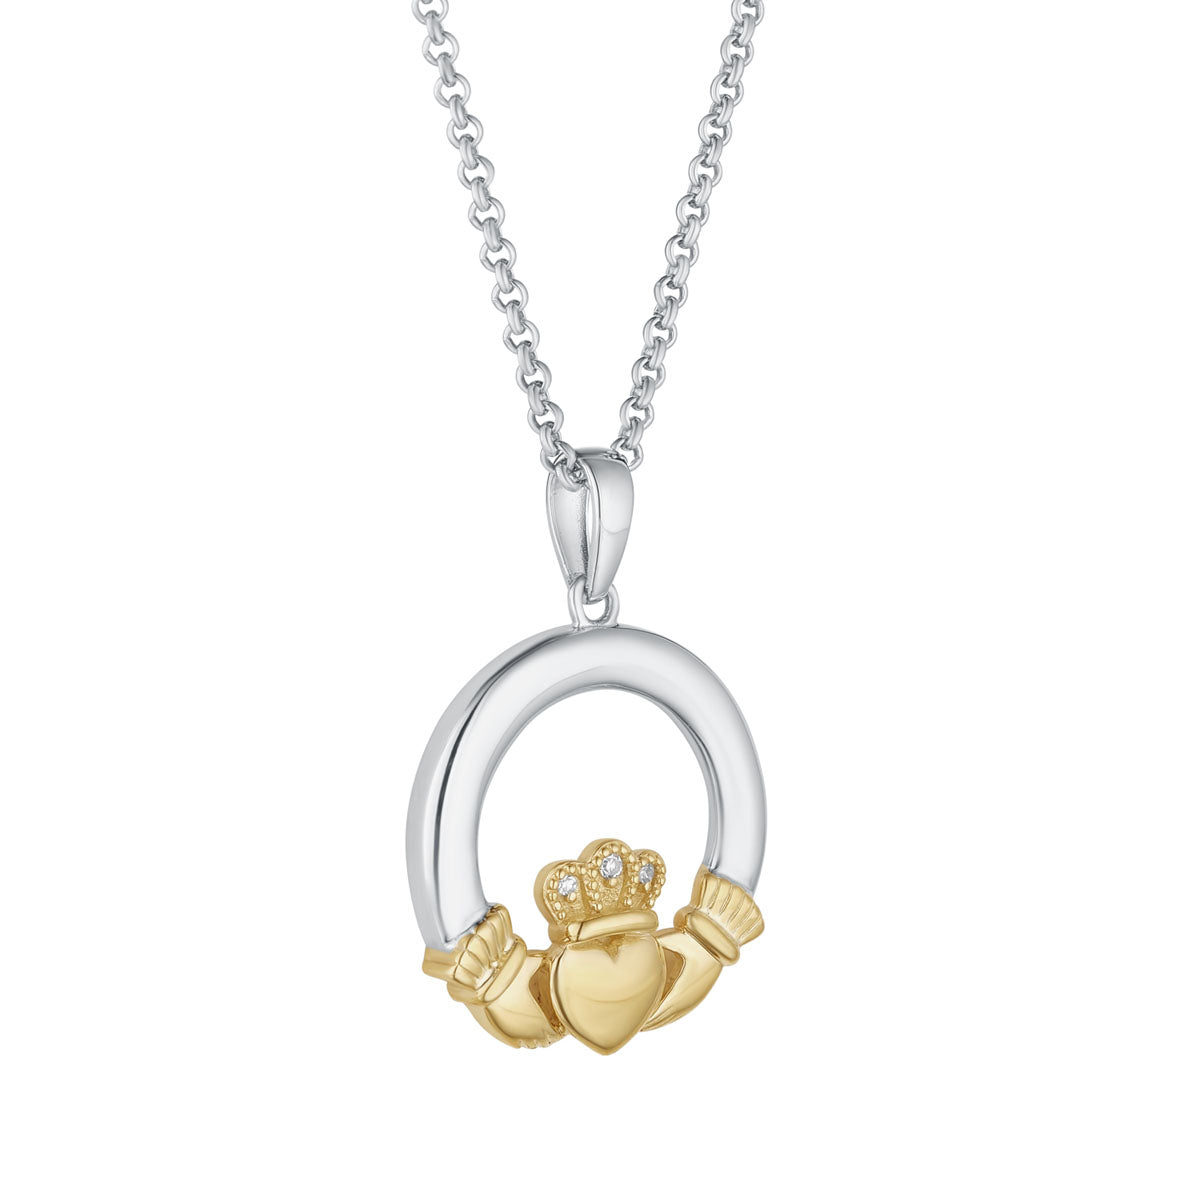 Stock image of Solvar Gold And Silver Diamond Claddagh Necklace S46936